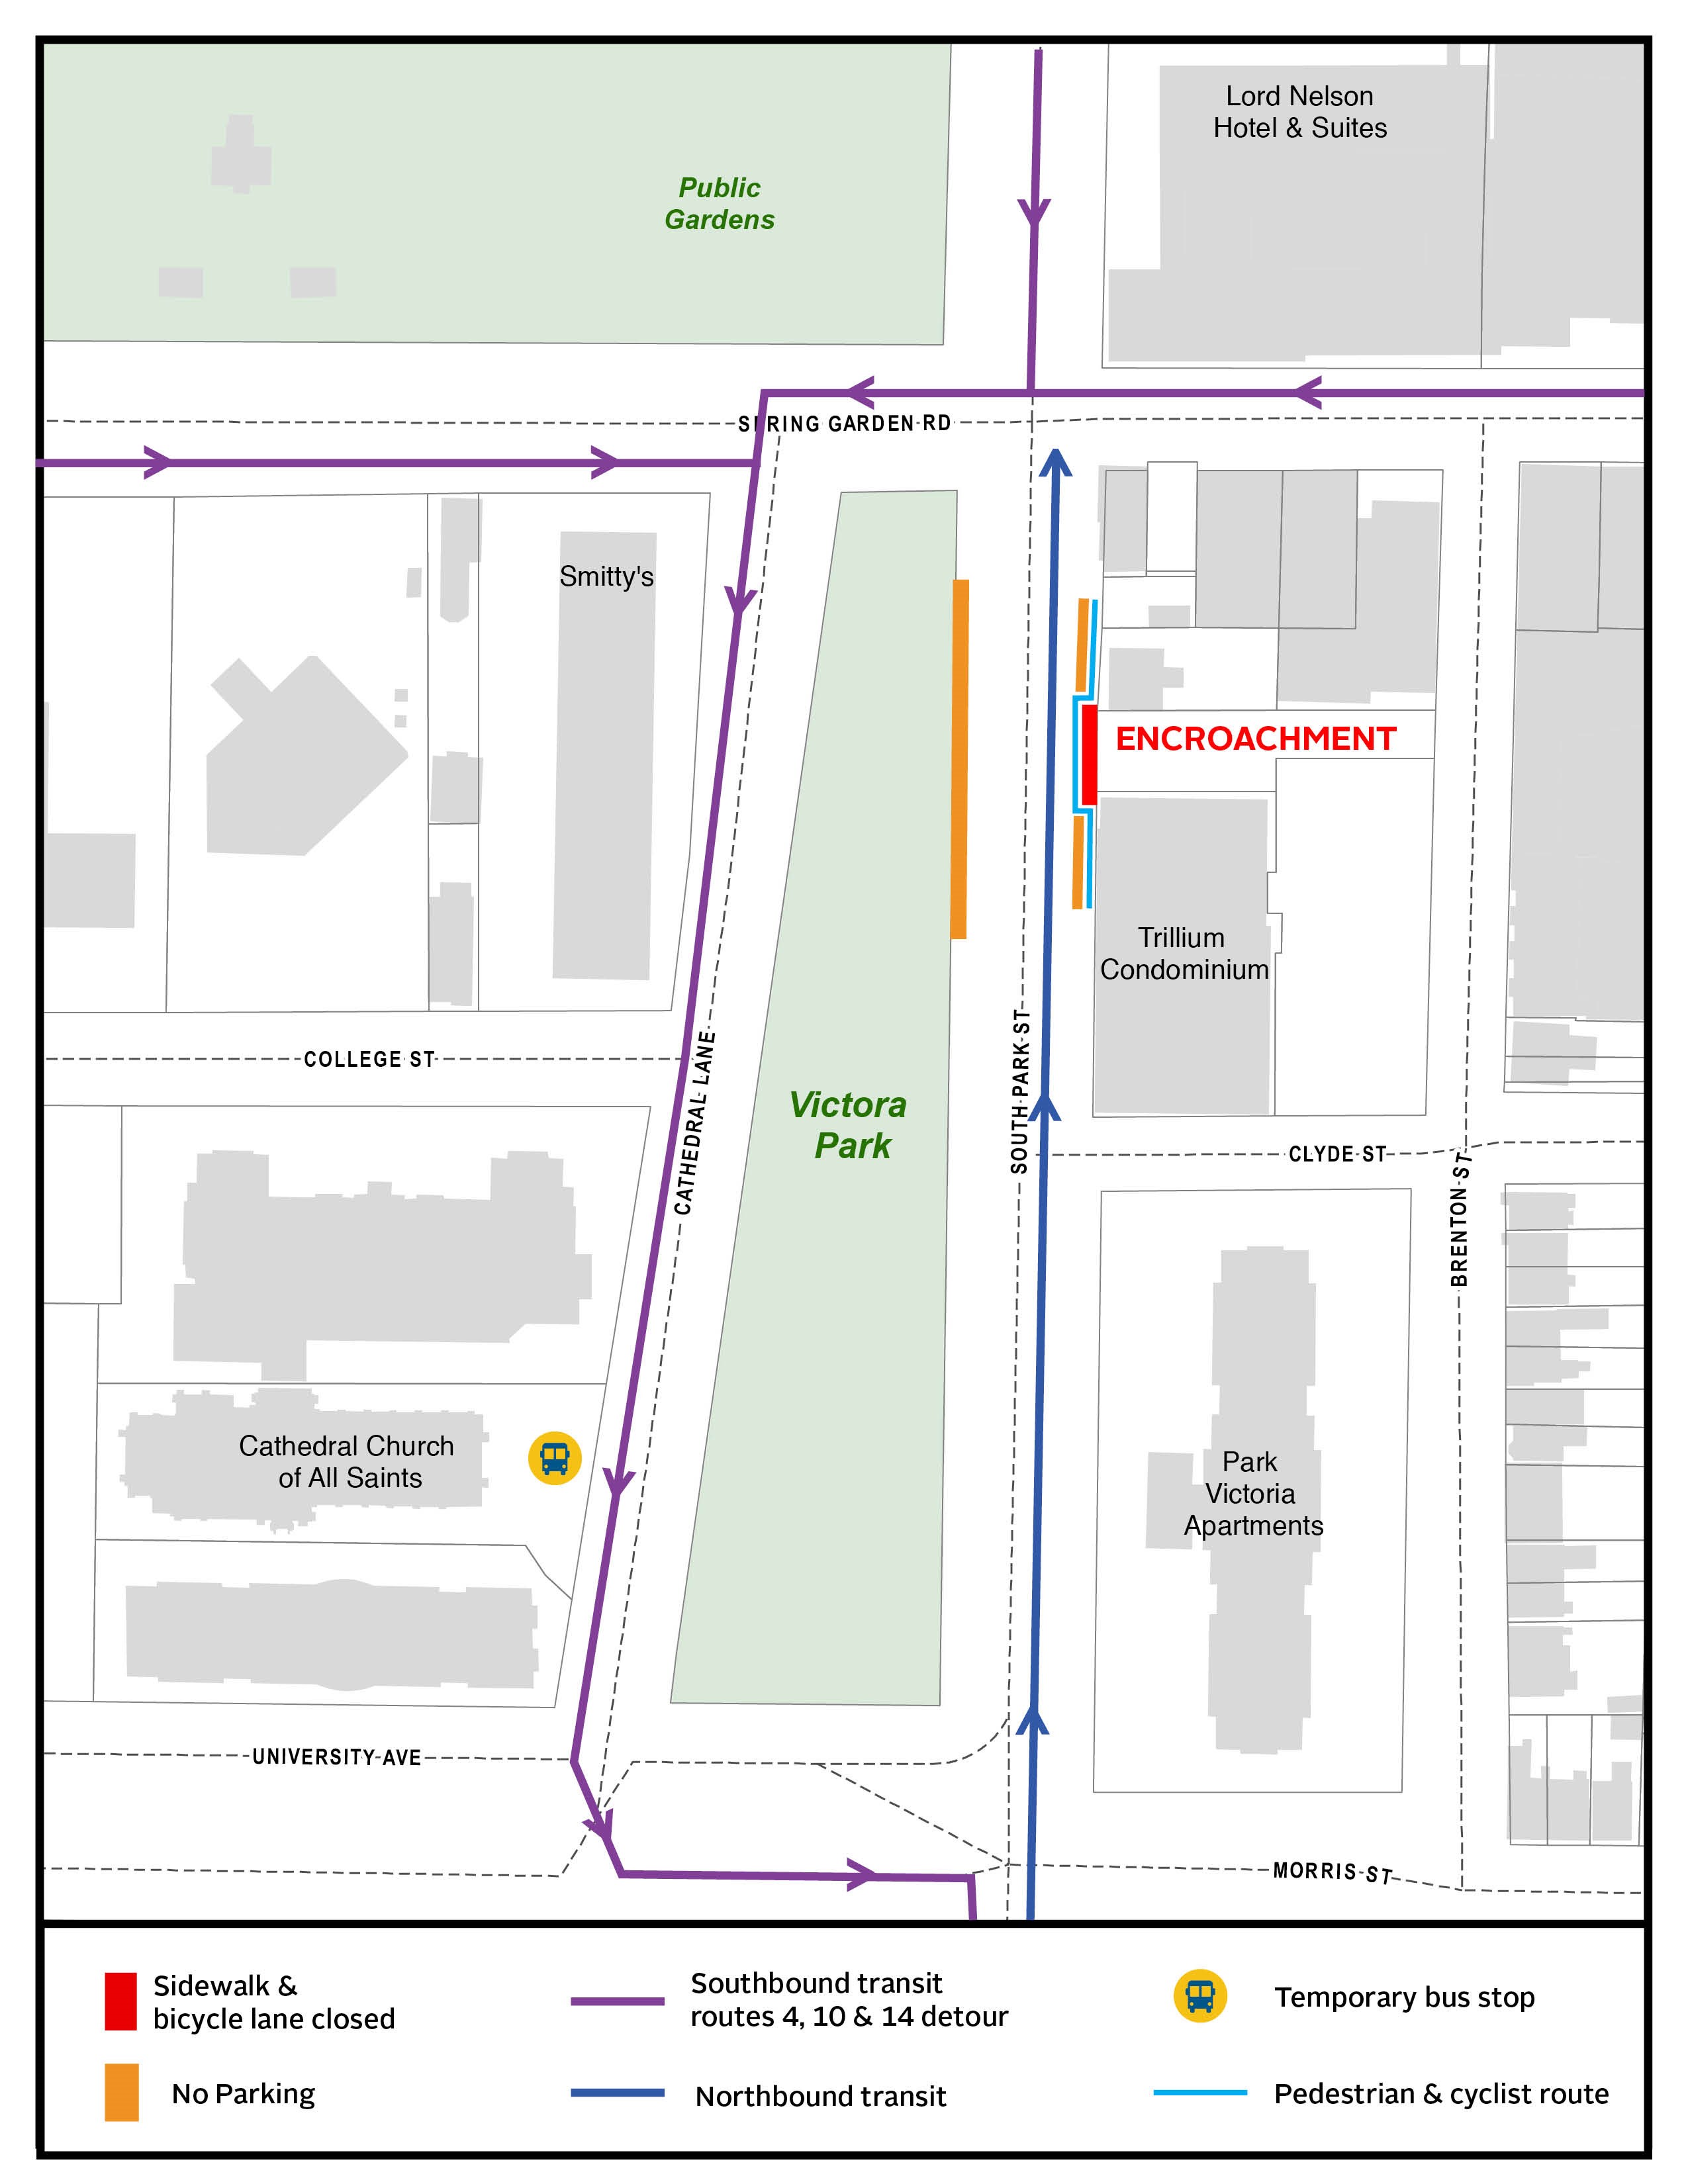 Detour map showing temporary transportation disruptions on South Park Street